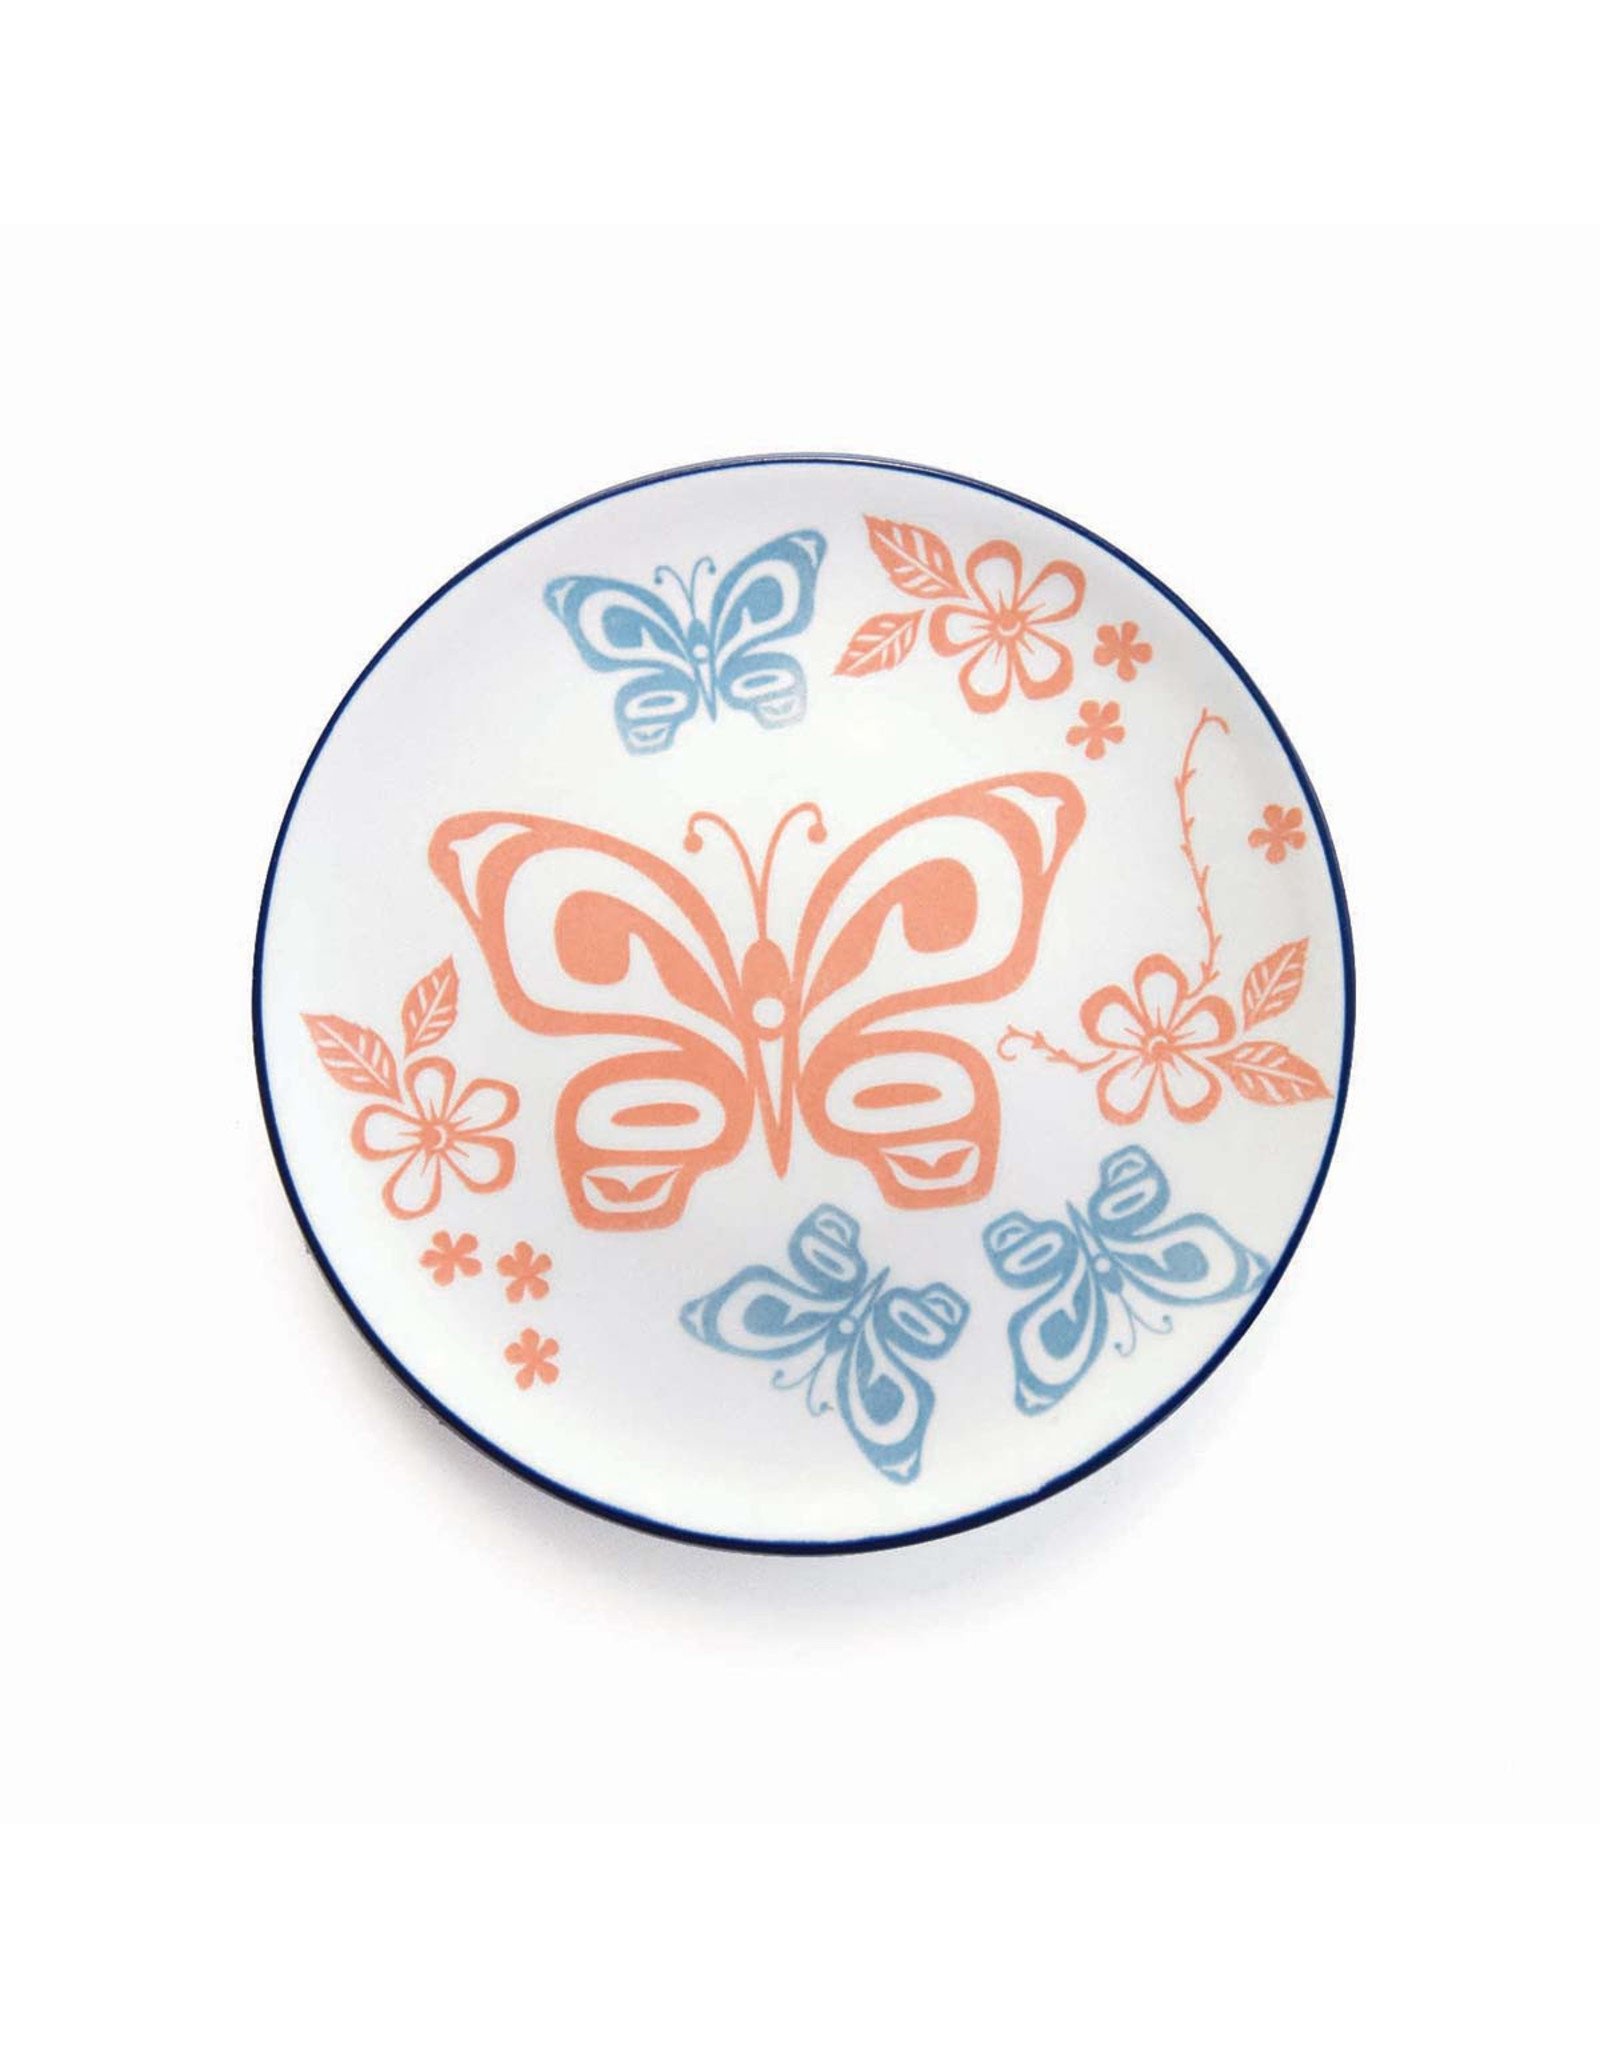 Porcelain Art Plate - Butterfly and Wild Rose by Justien Senoa Wood (PLATE16)